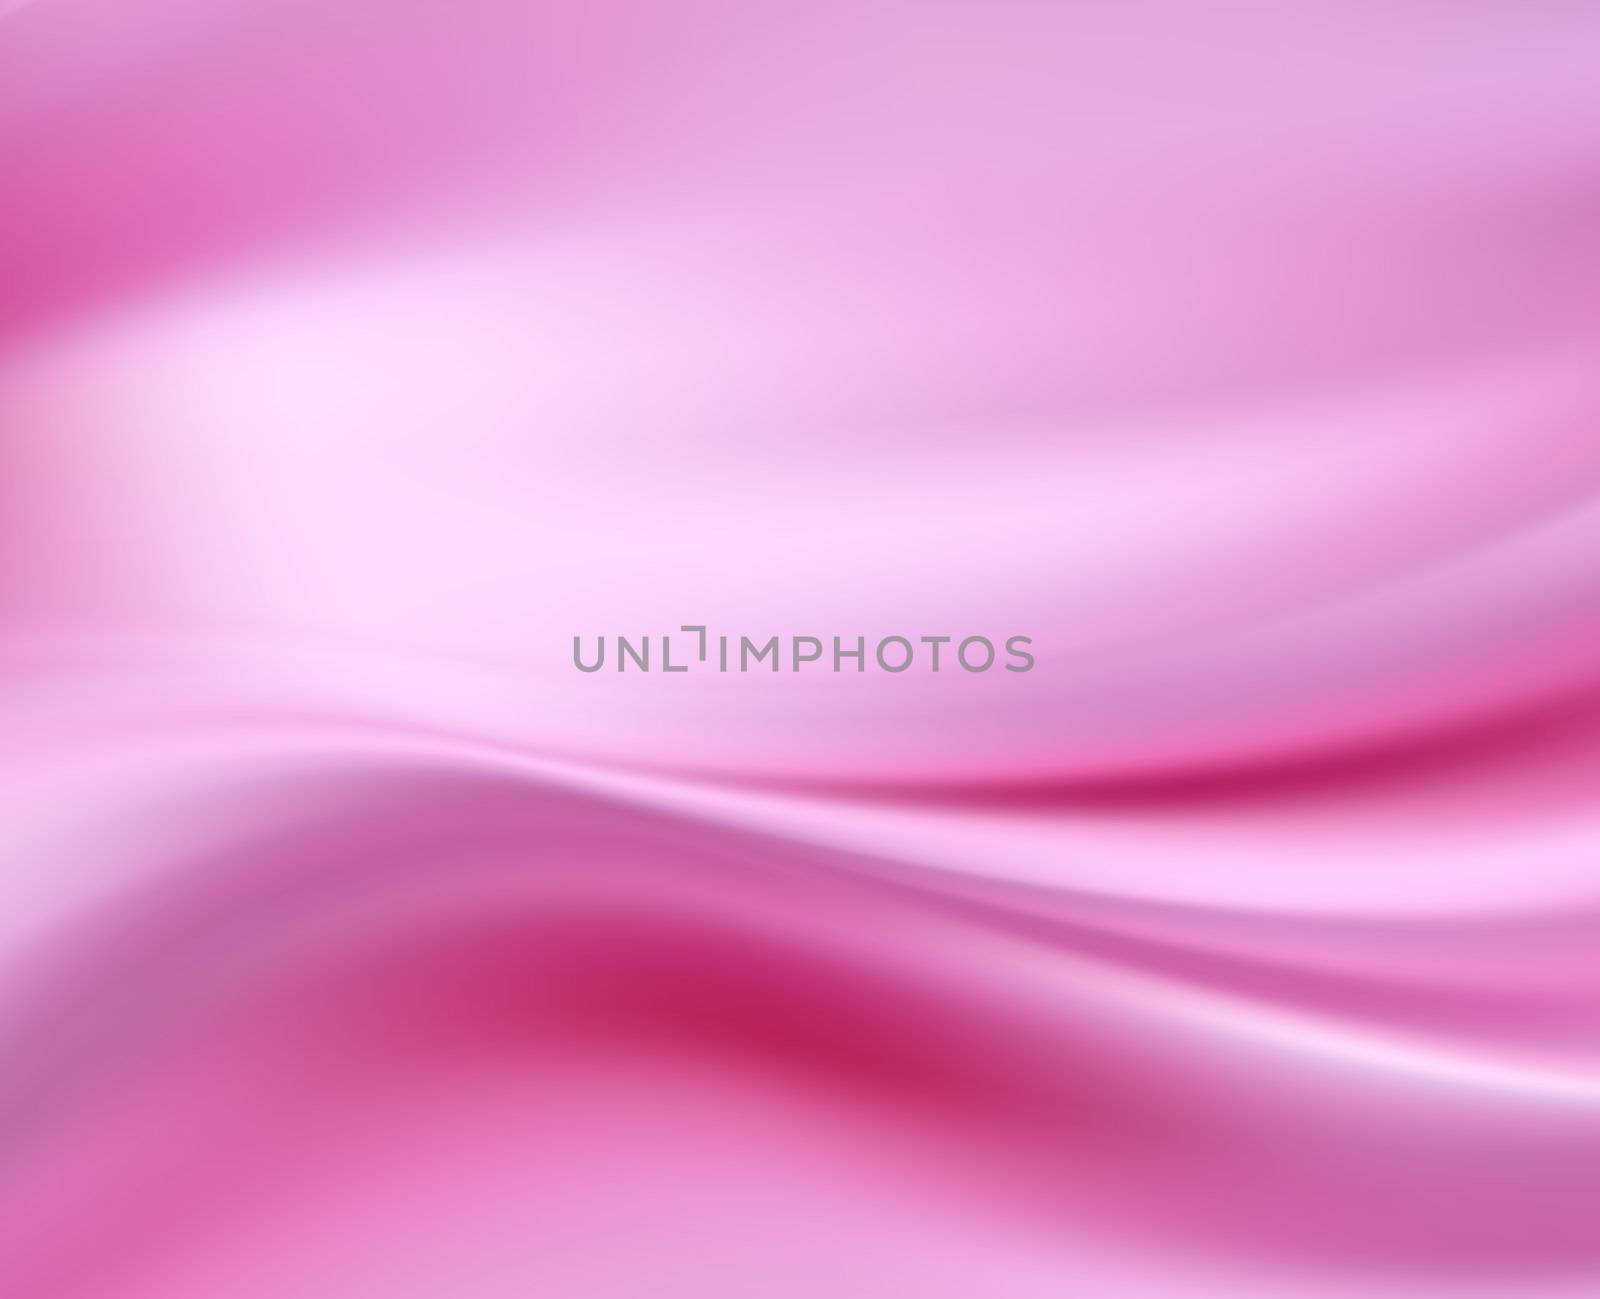 Pink Silk Fabric for Drapery Abstract Background